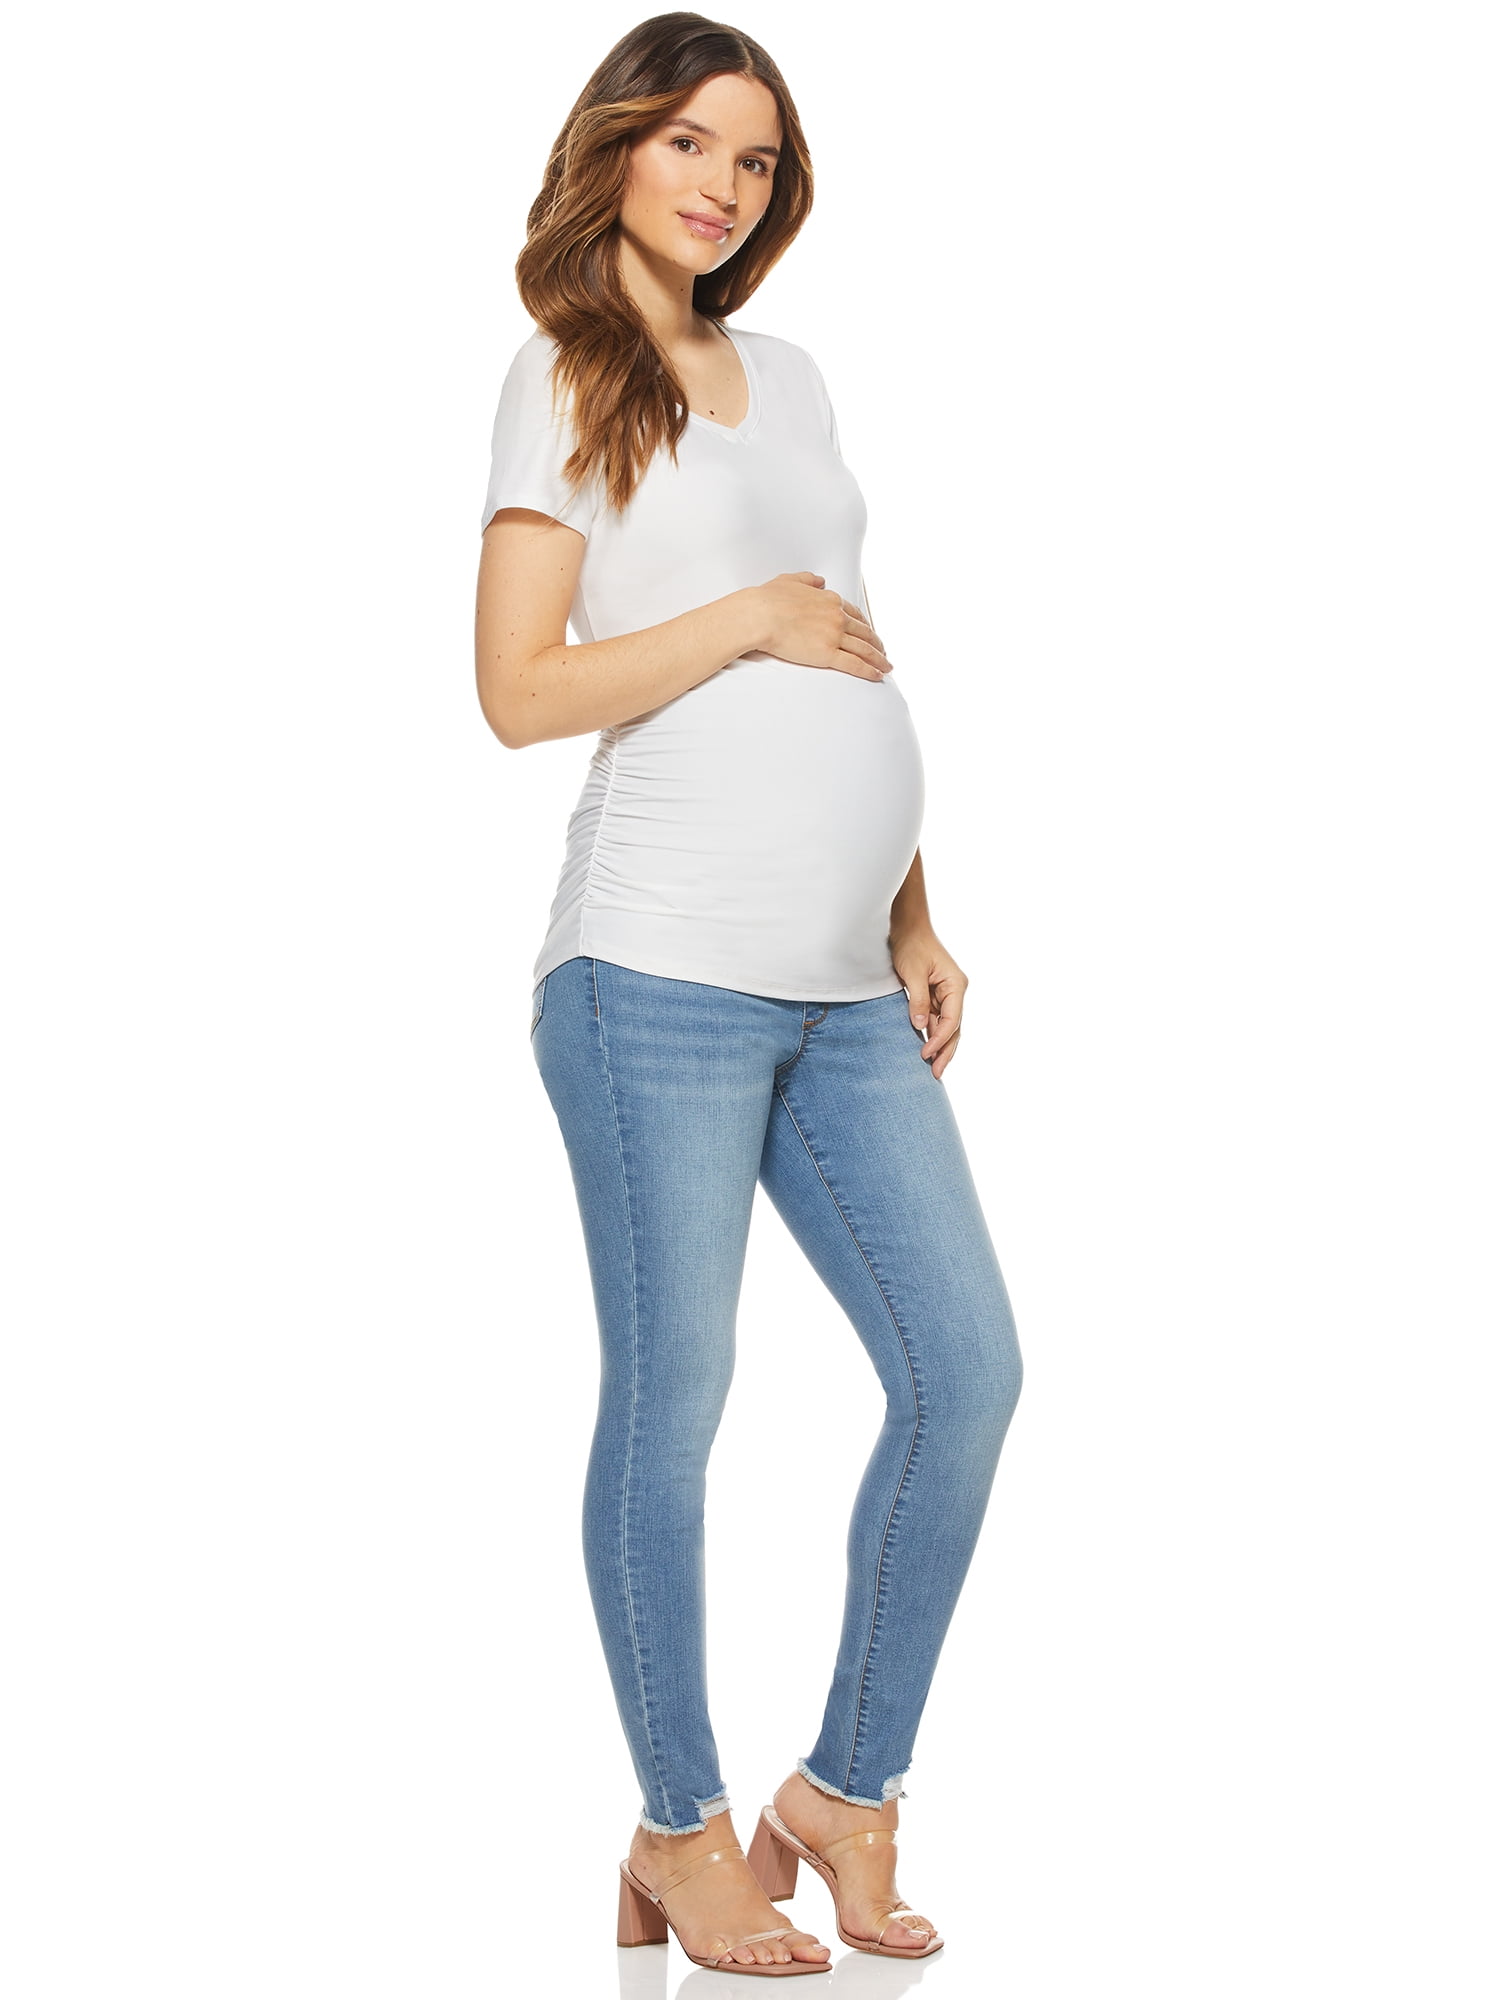 Fashion Fridays: The Best Maternity Jeans for Curvy Girls - A